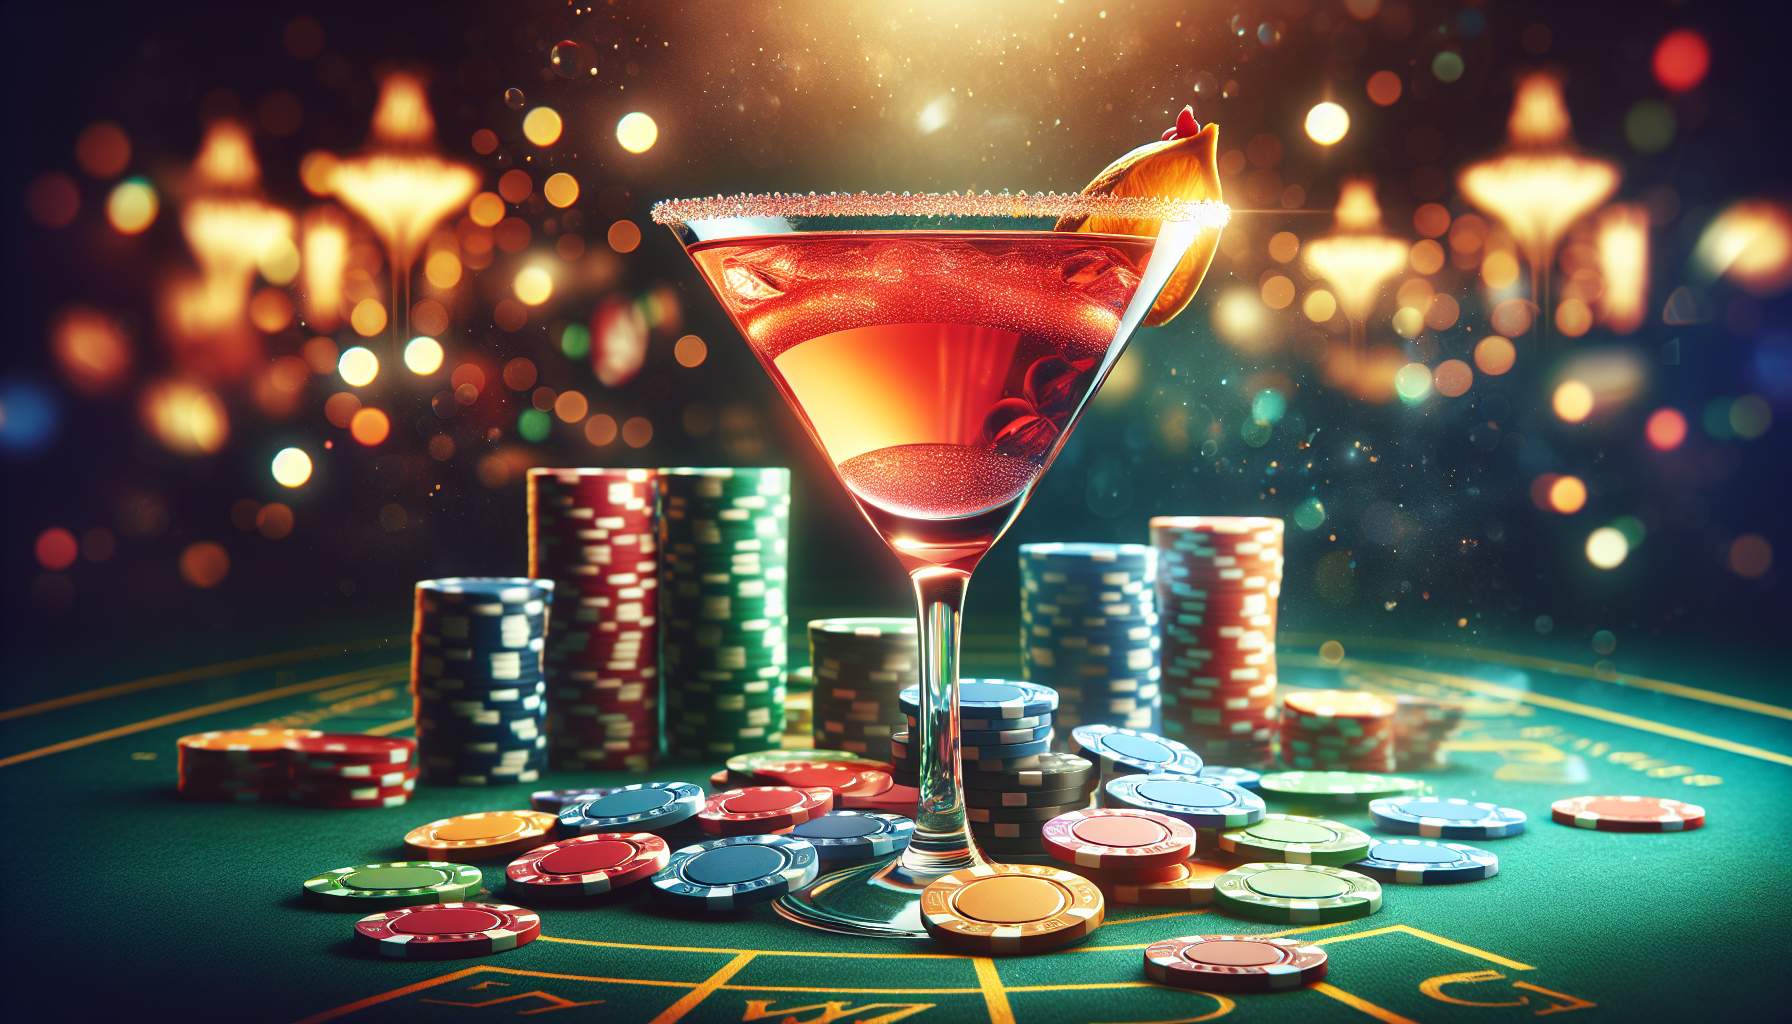 Are There Any Casinos That Offer Free Drinks While Gambling In Las Vegas?